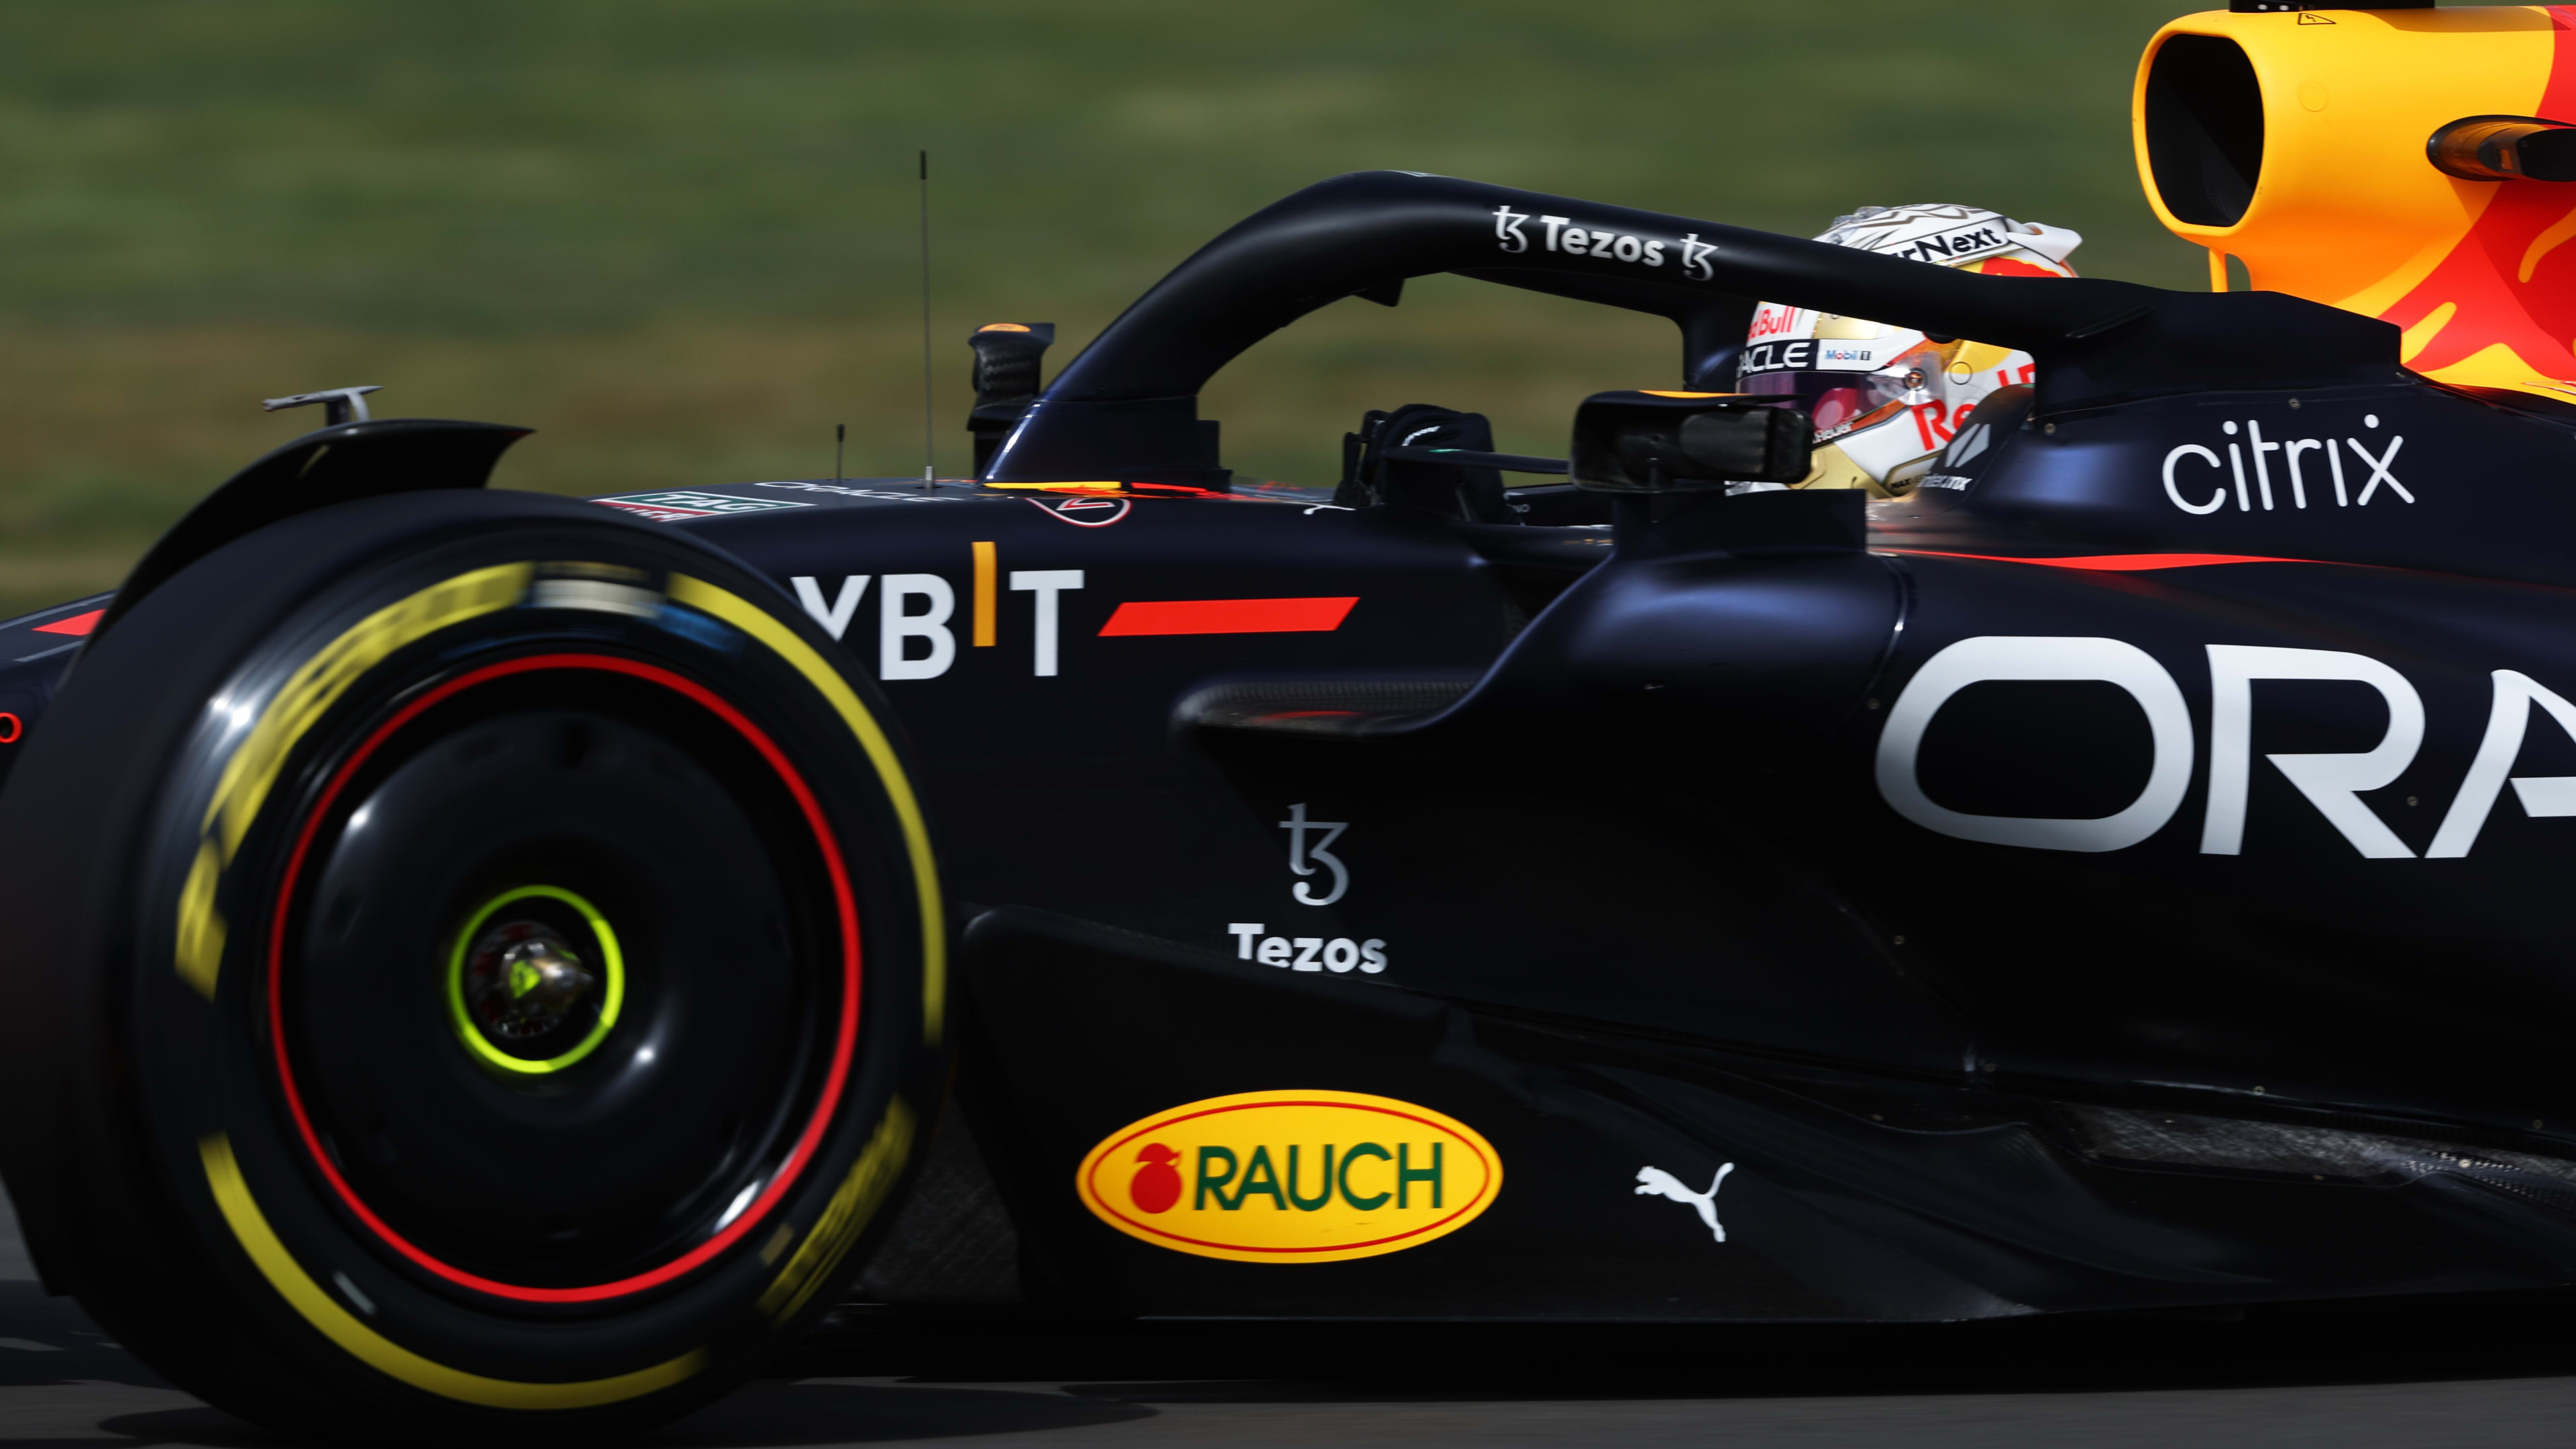 FP3 report and highlights from the 2022 British Grand Prix Dominant Verstappen heads Red Bull 1-2 in final practice ahead of British Grand Prix qualifying Formula 1®